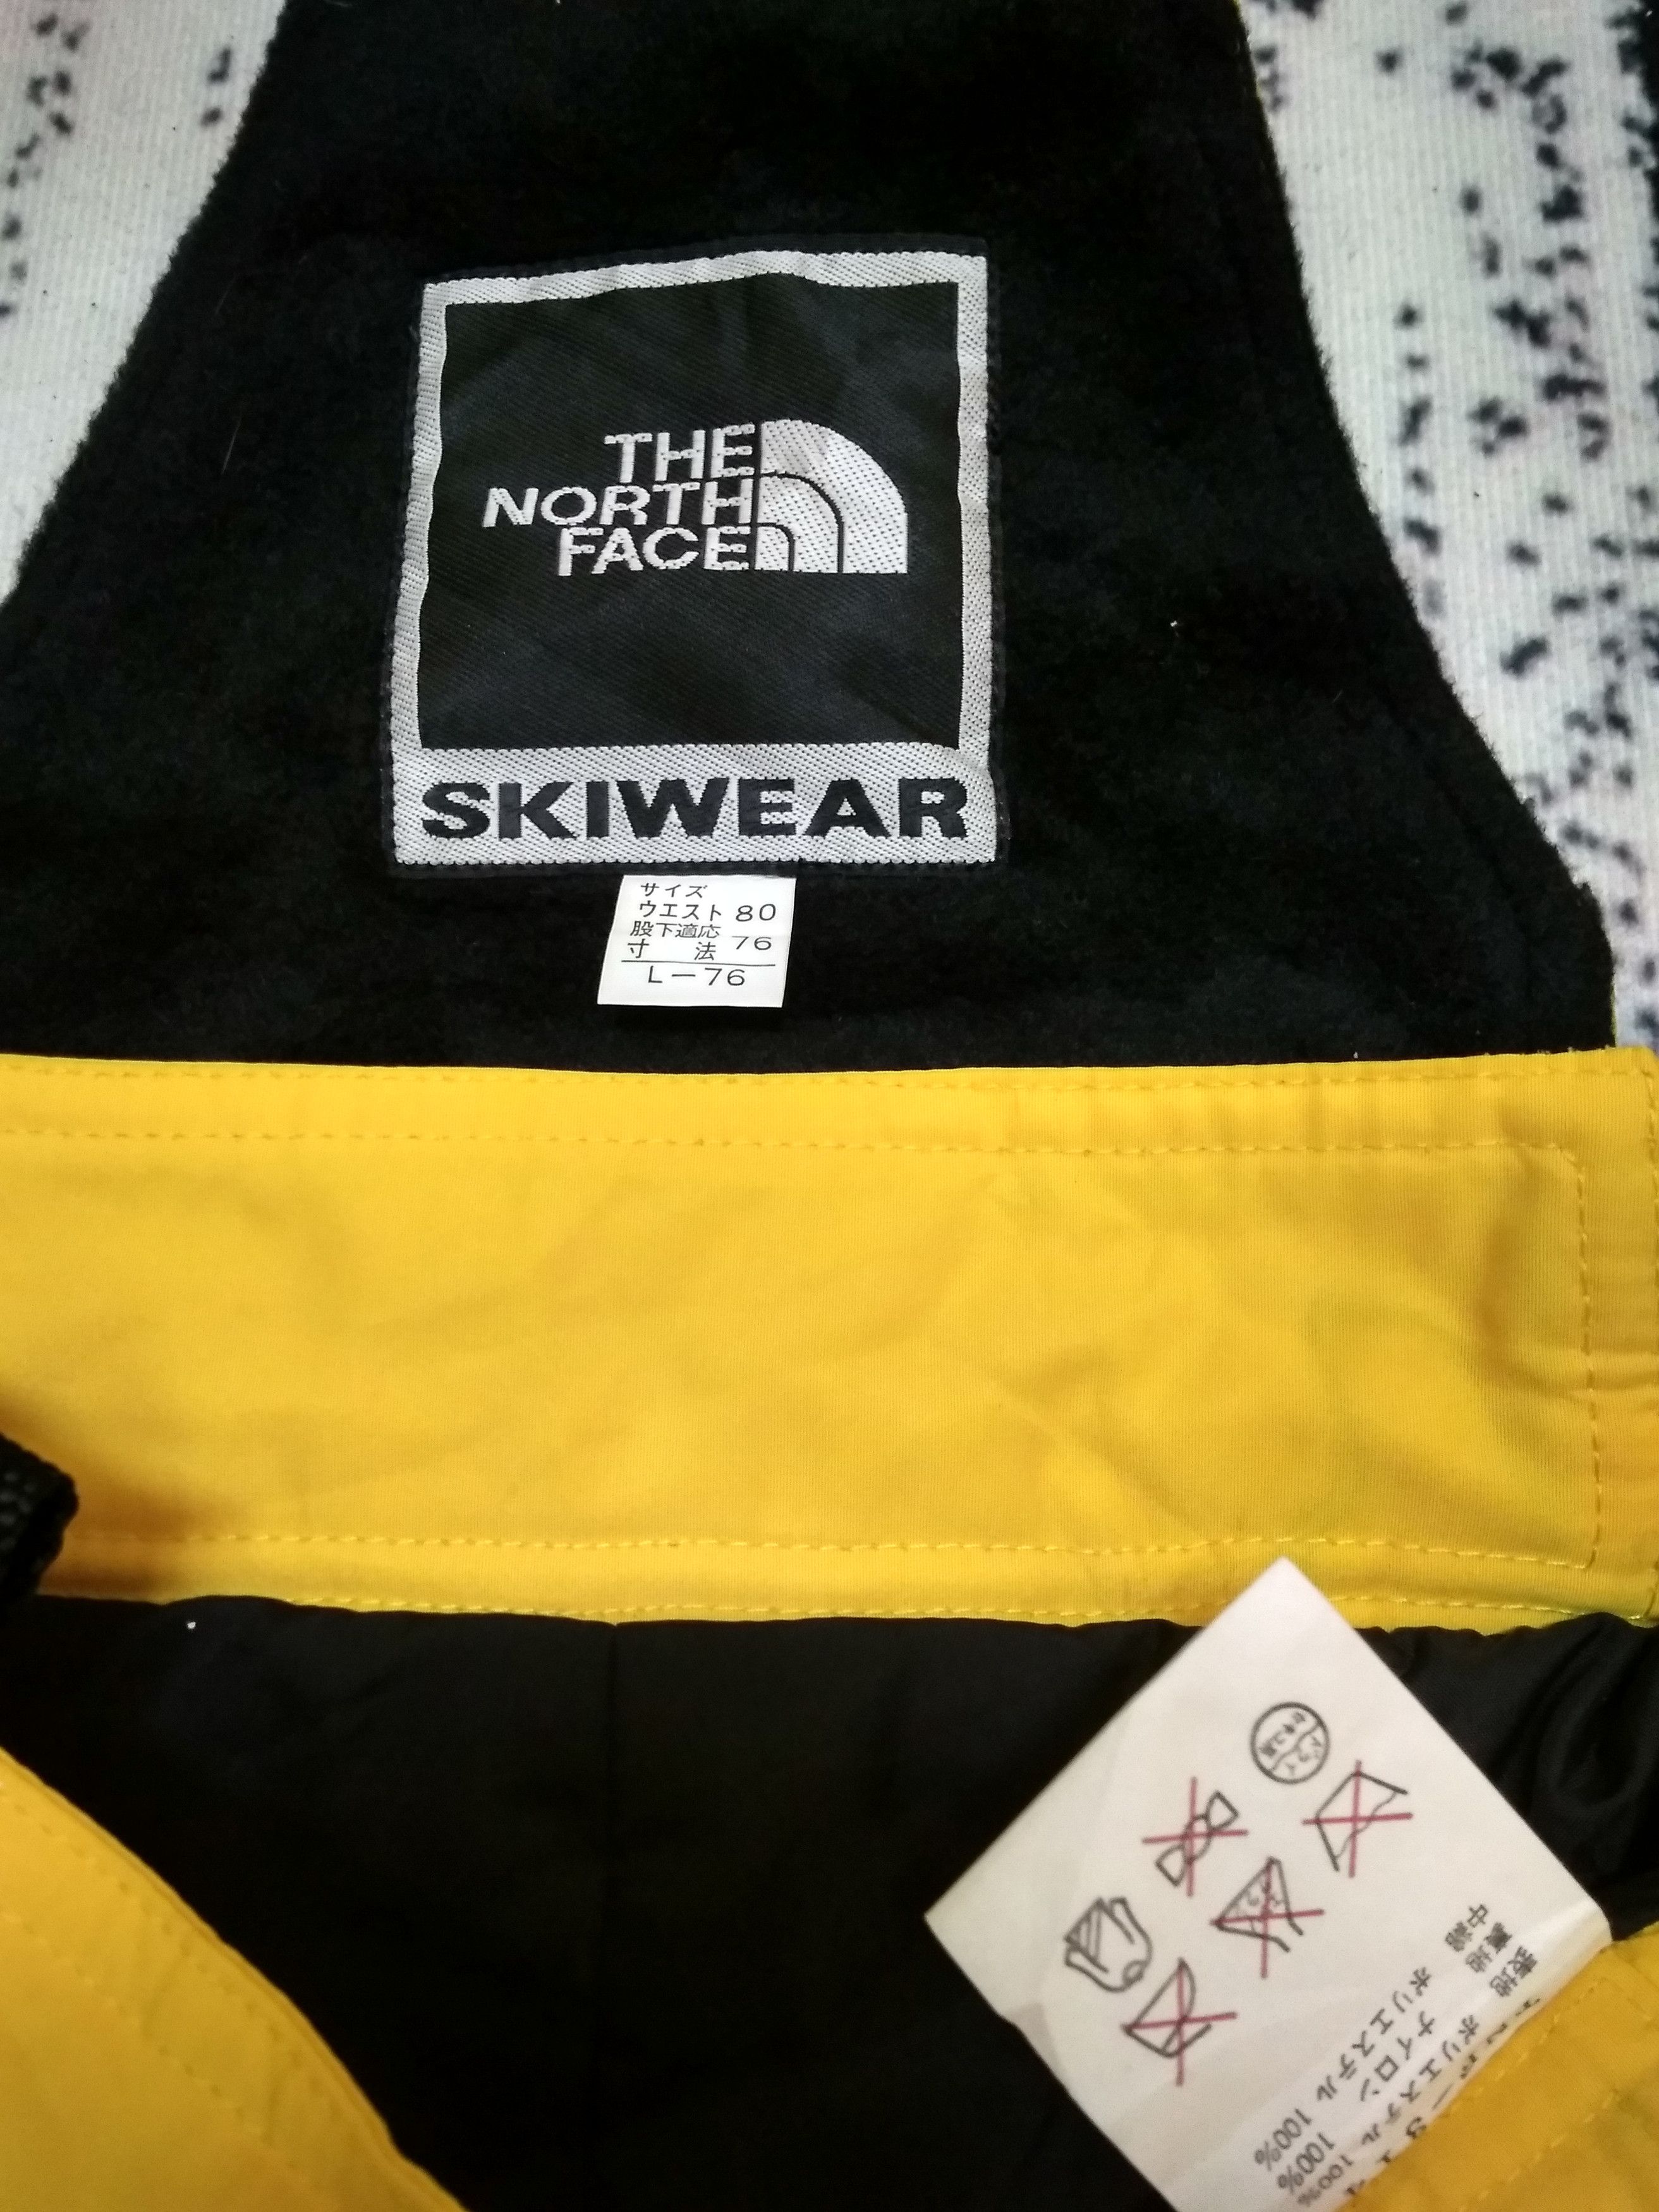 The North Face The North Face Overall Skiwear Size US 33 - 6 Preview